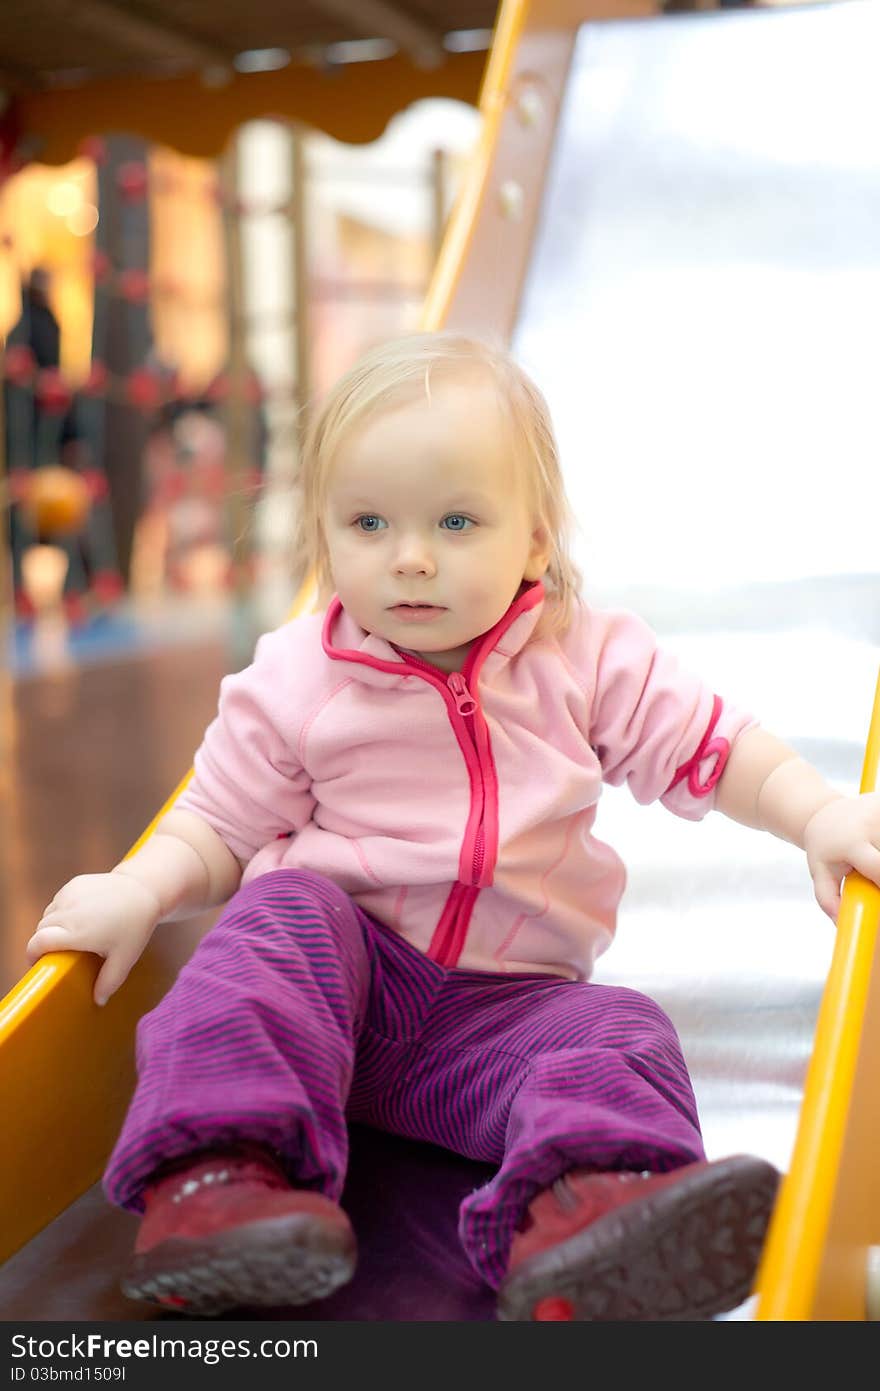 Young adorable baby sliding down baby slide on playground in mall. Sitting on the end of slide